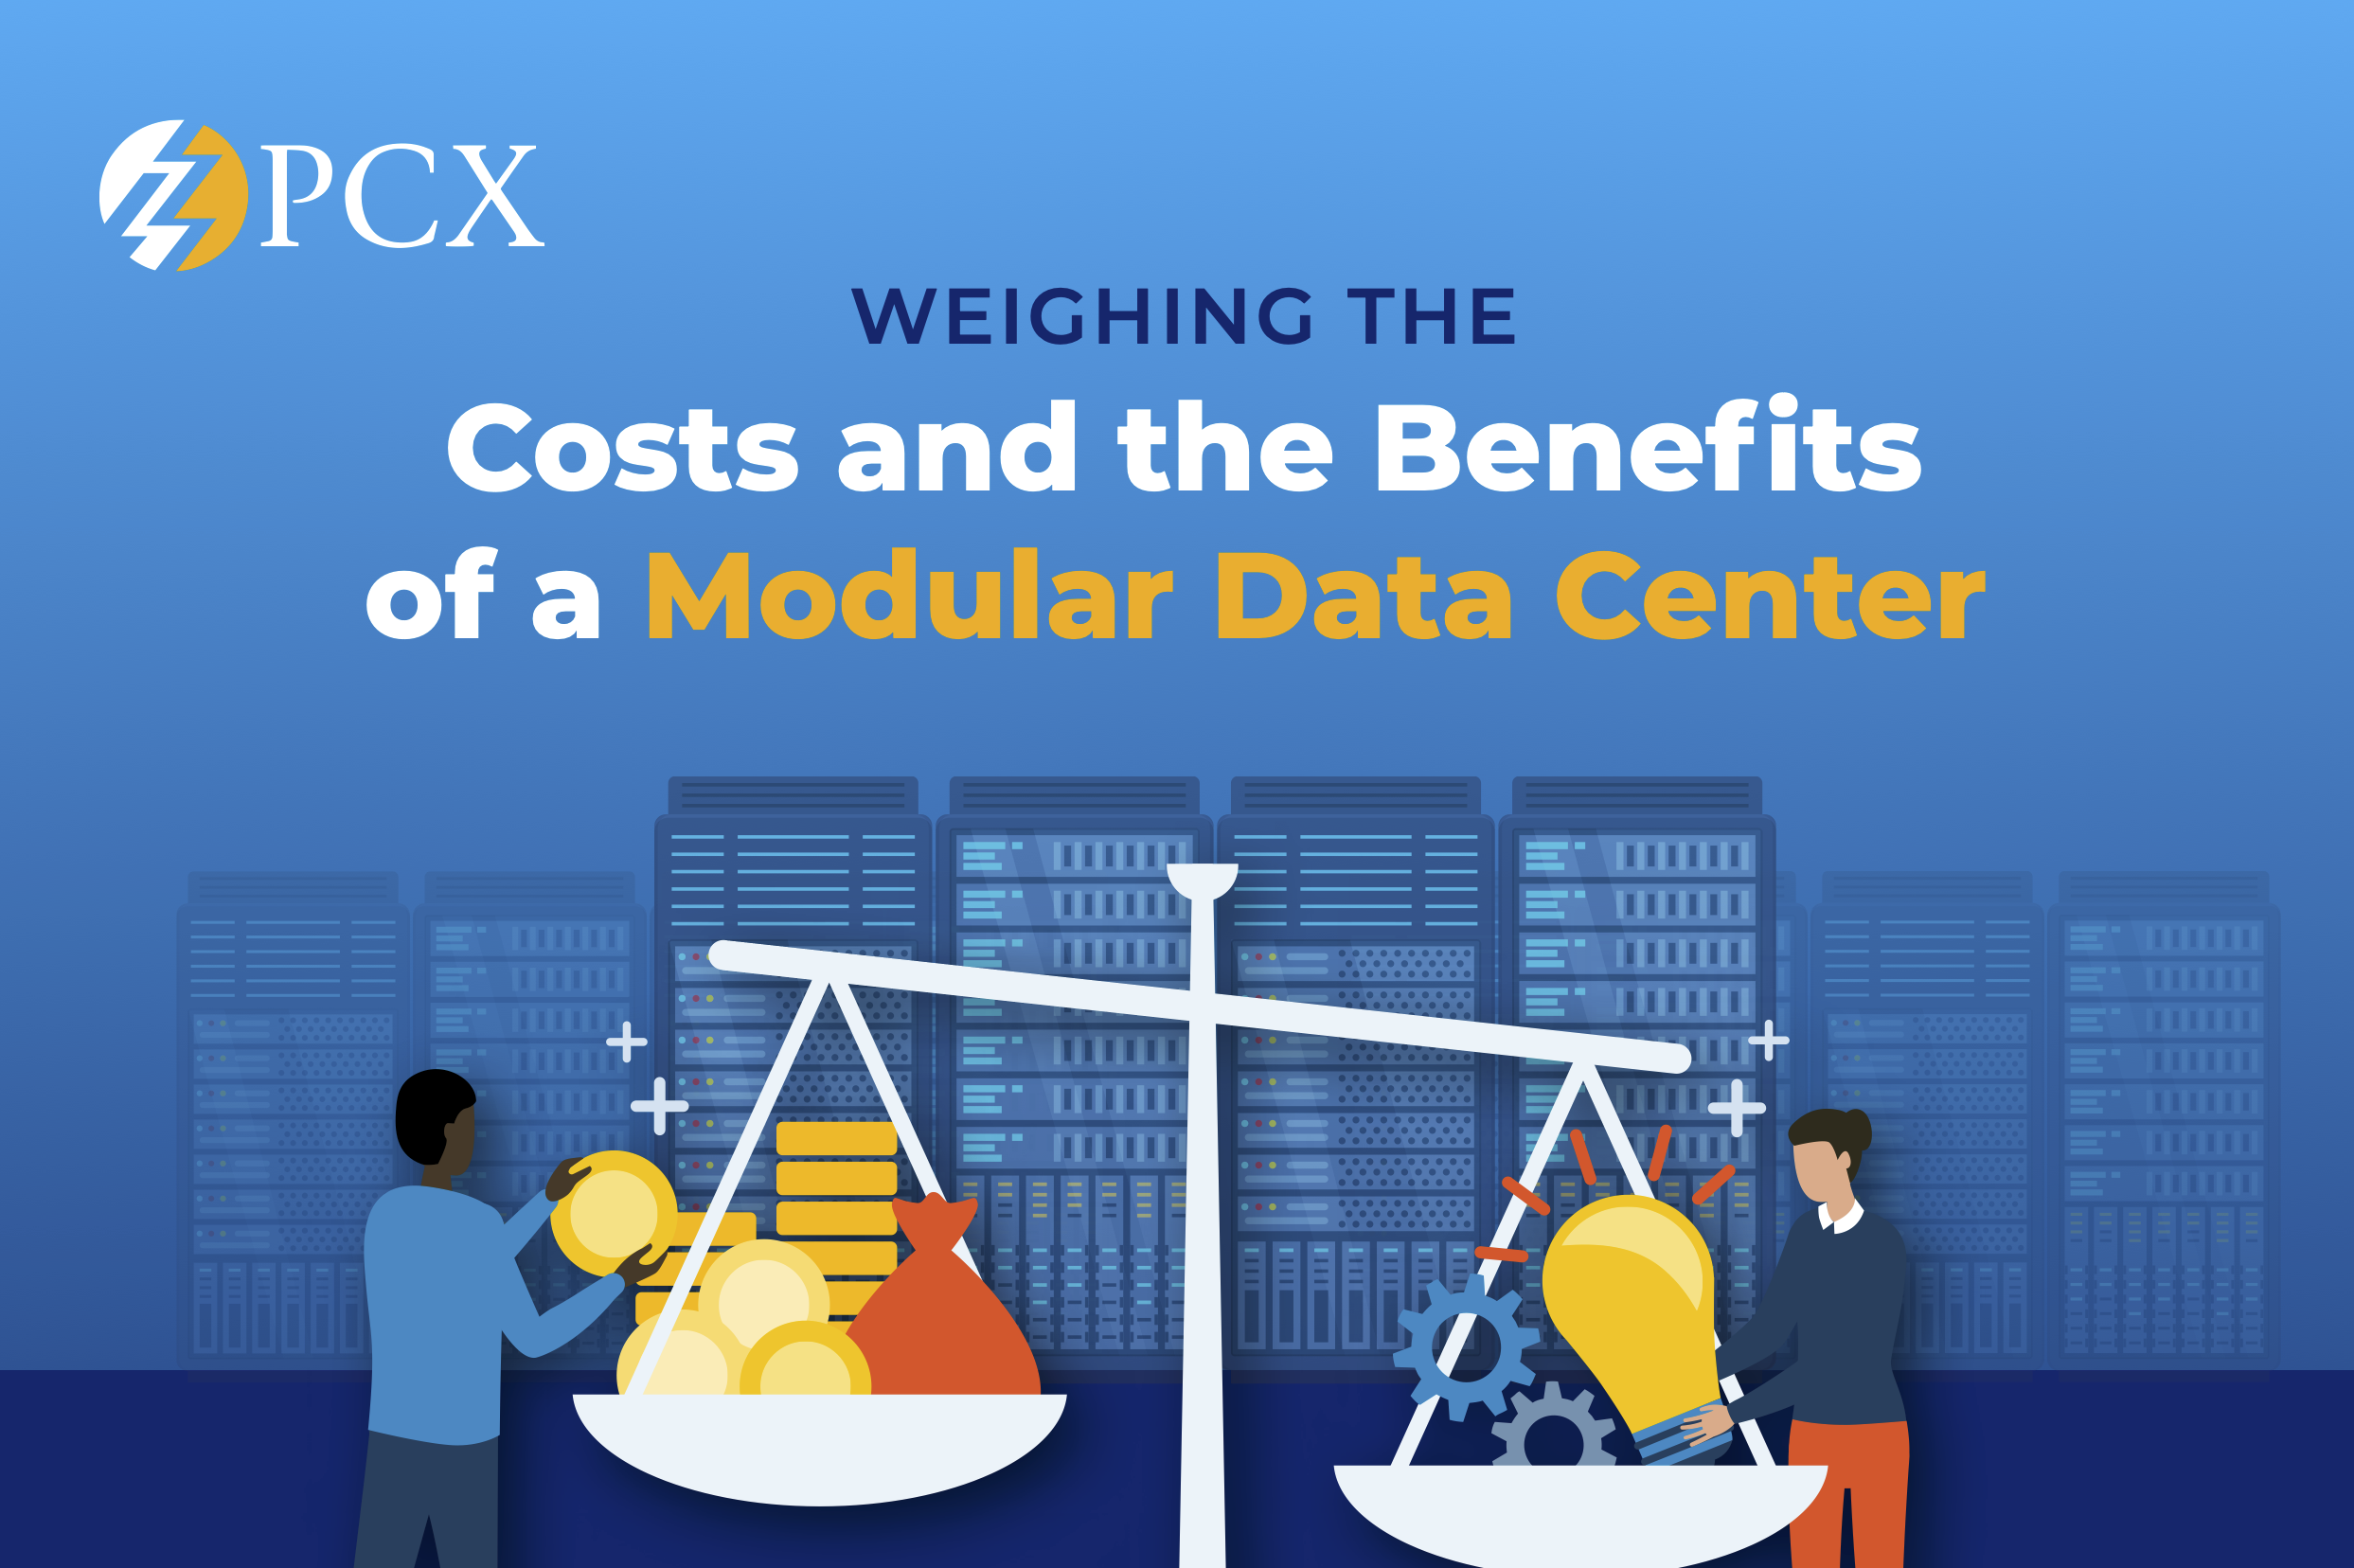 [Infographic] Weighing the Cost and the Benefits of a Modular Data Center